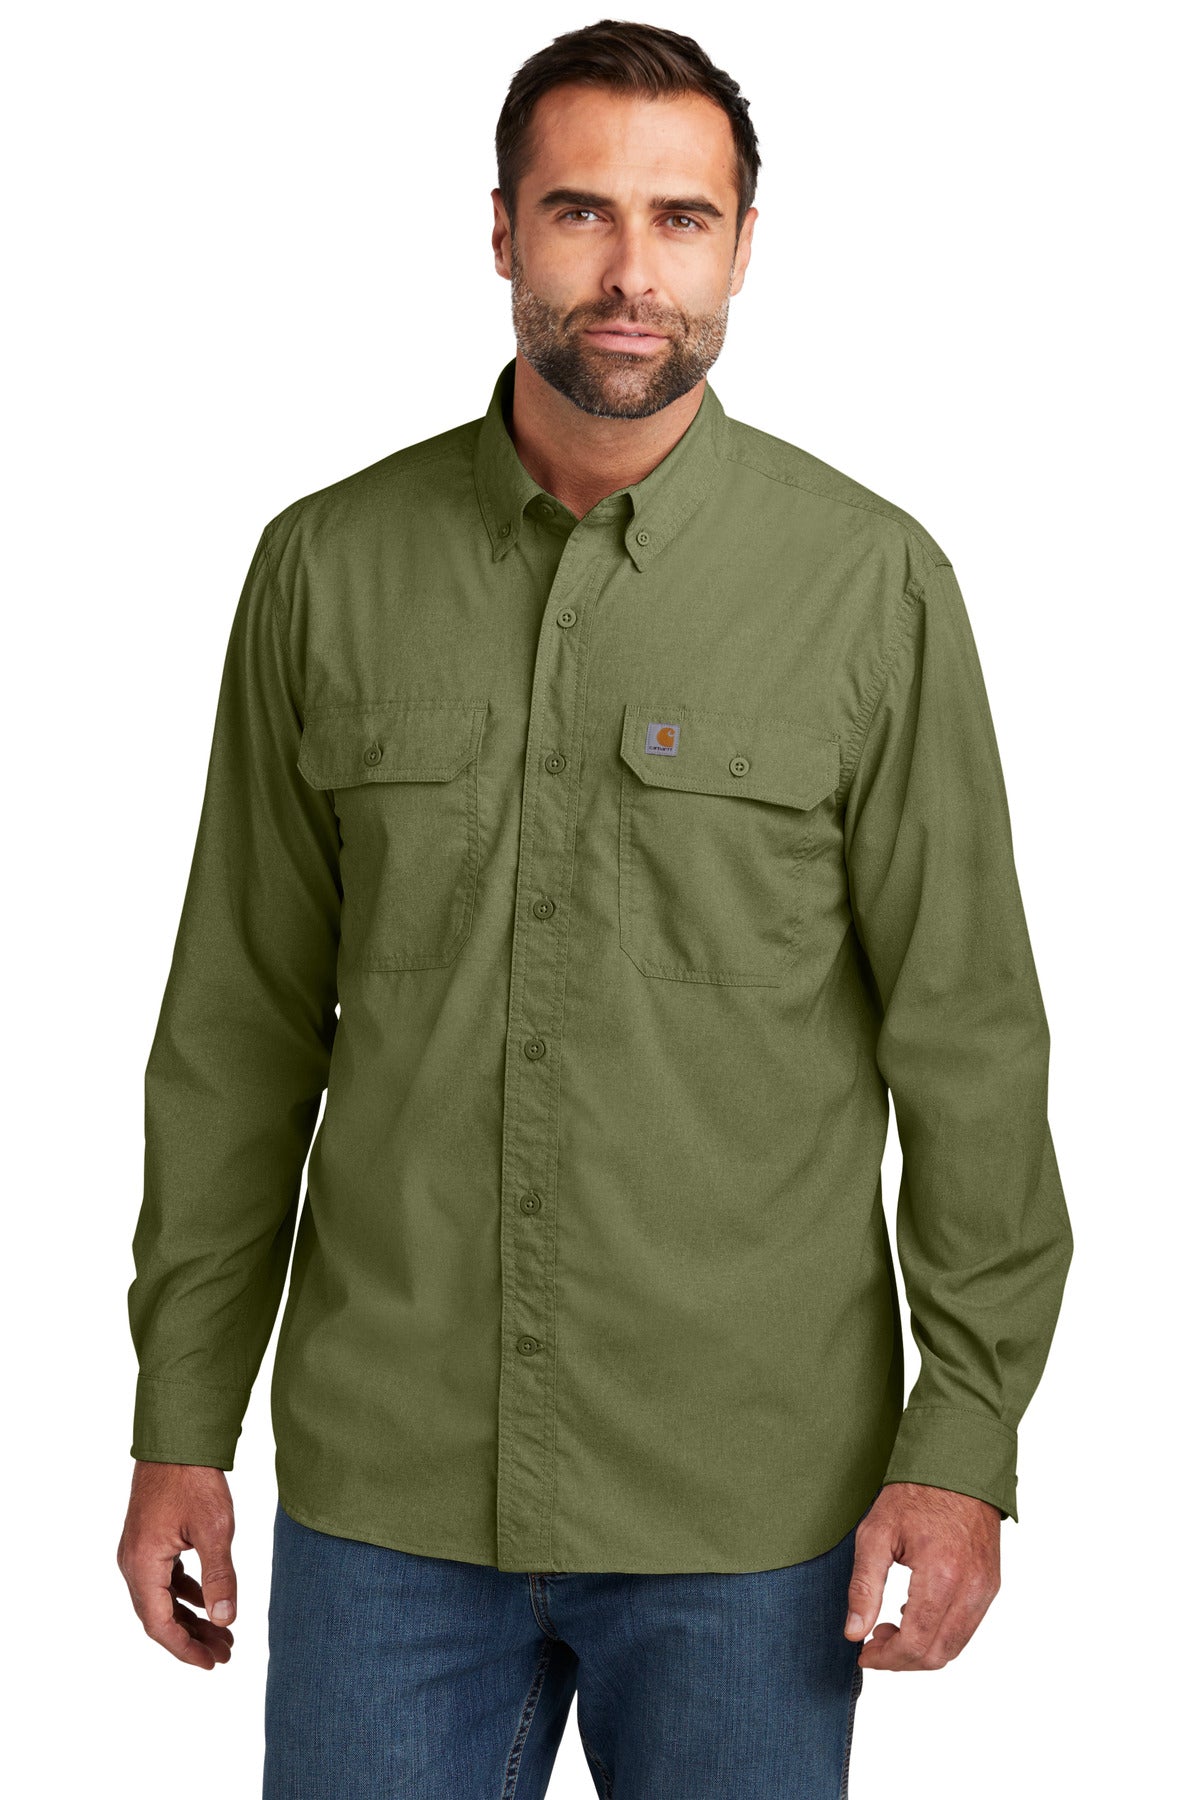 Carhartt Force® Solid Long Sleeve Shirt CT105291 - DFW Impression